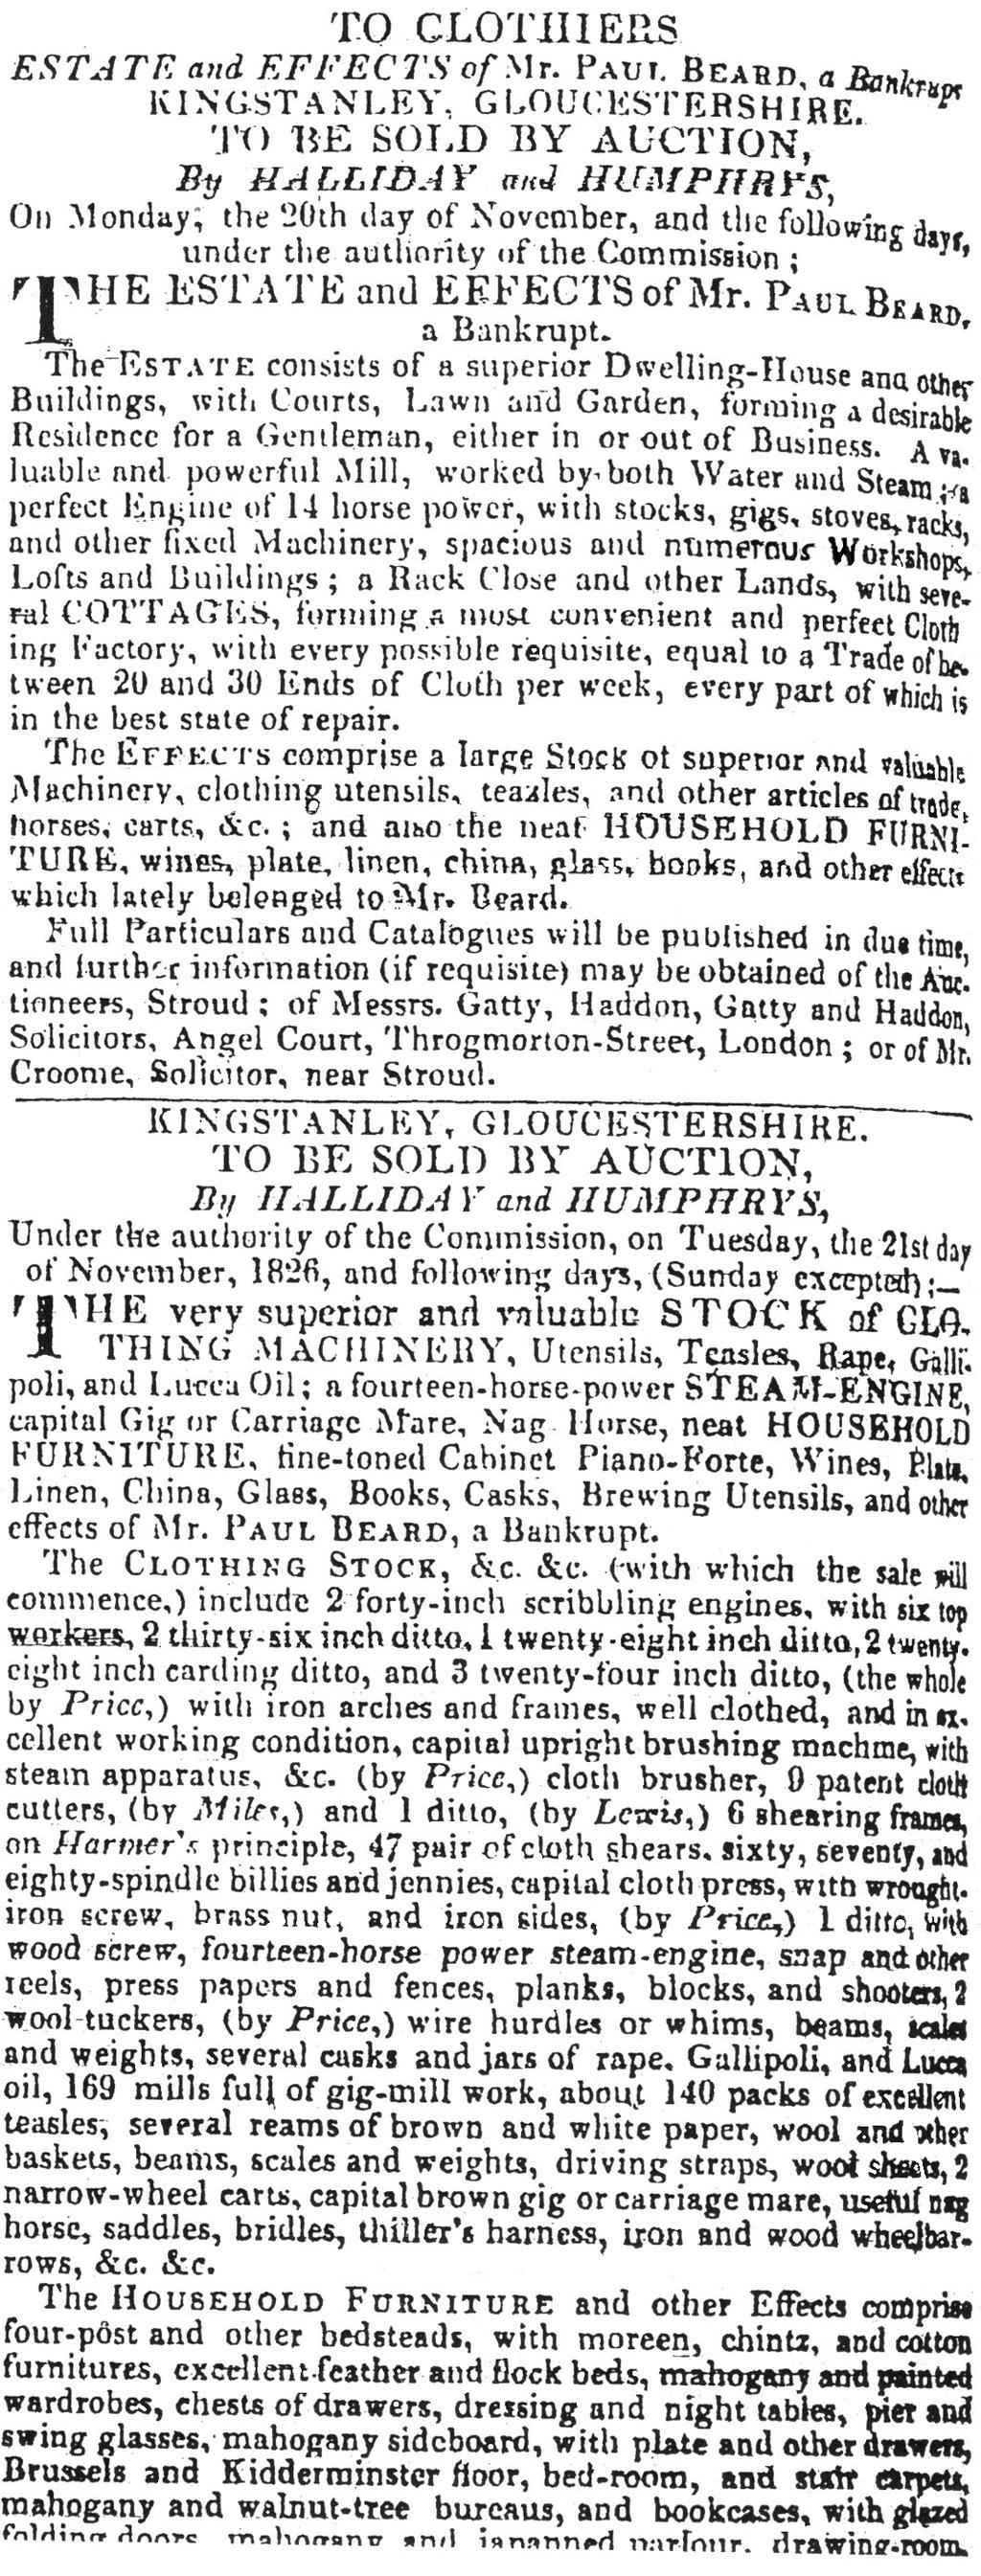 offering the mill and mansion as well as their contents and once again referring to Beard as a bankrupt (Ref. 13 and Figure 5).